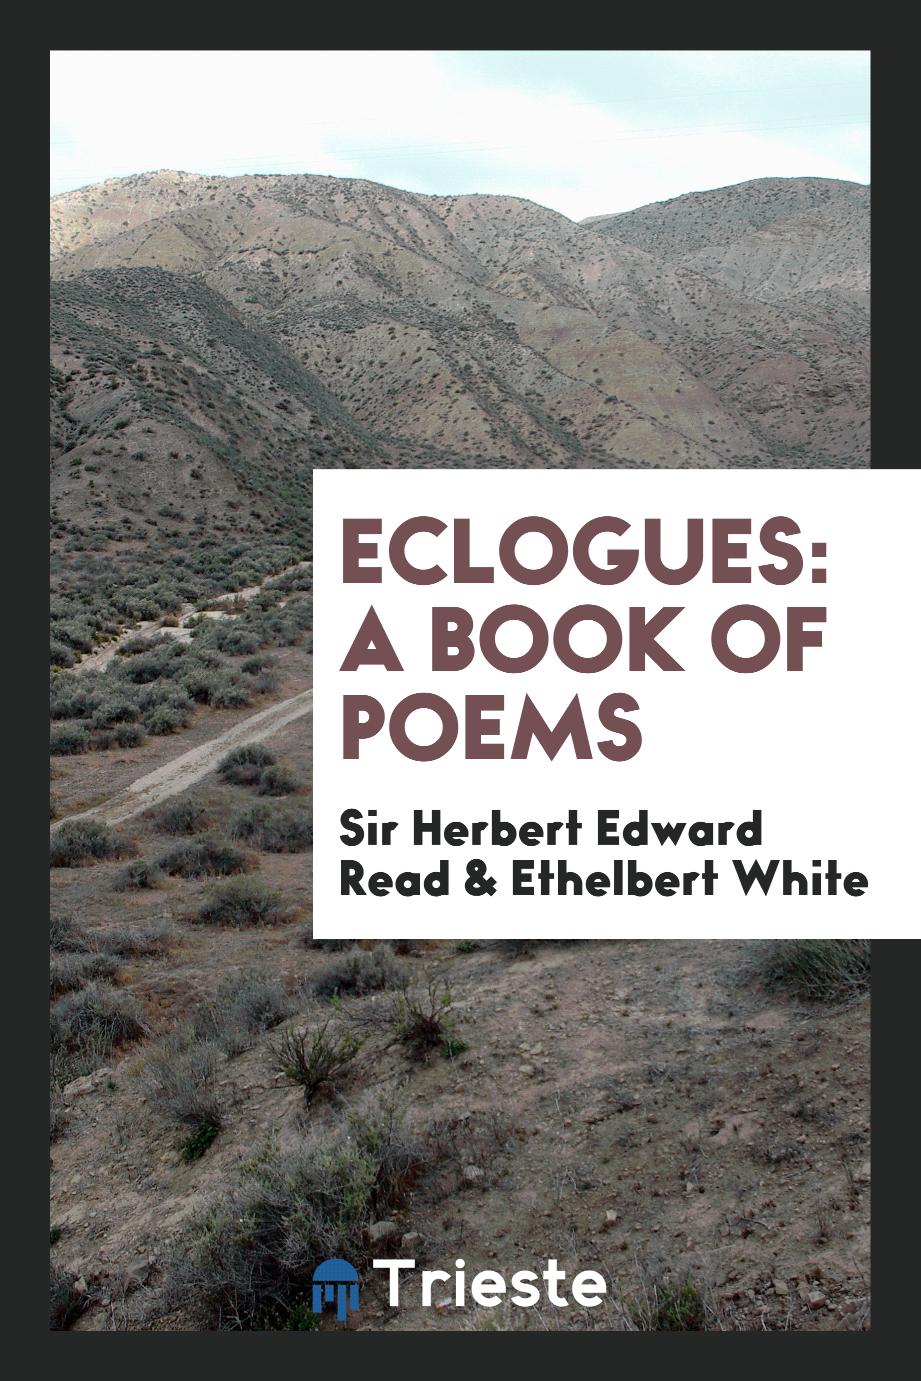 Eclogues: a book of poems